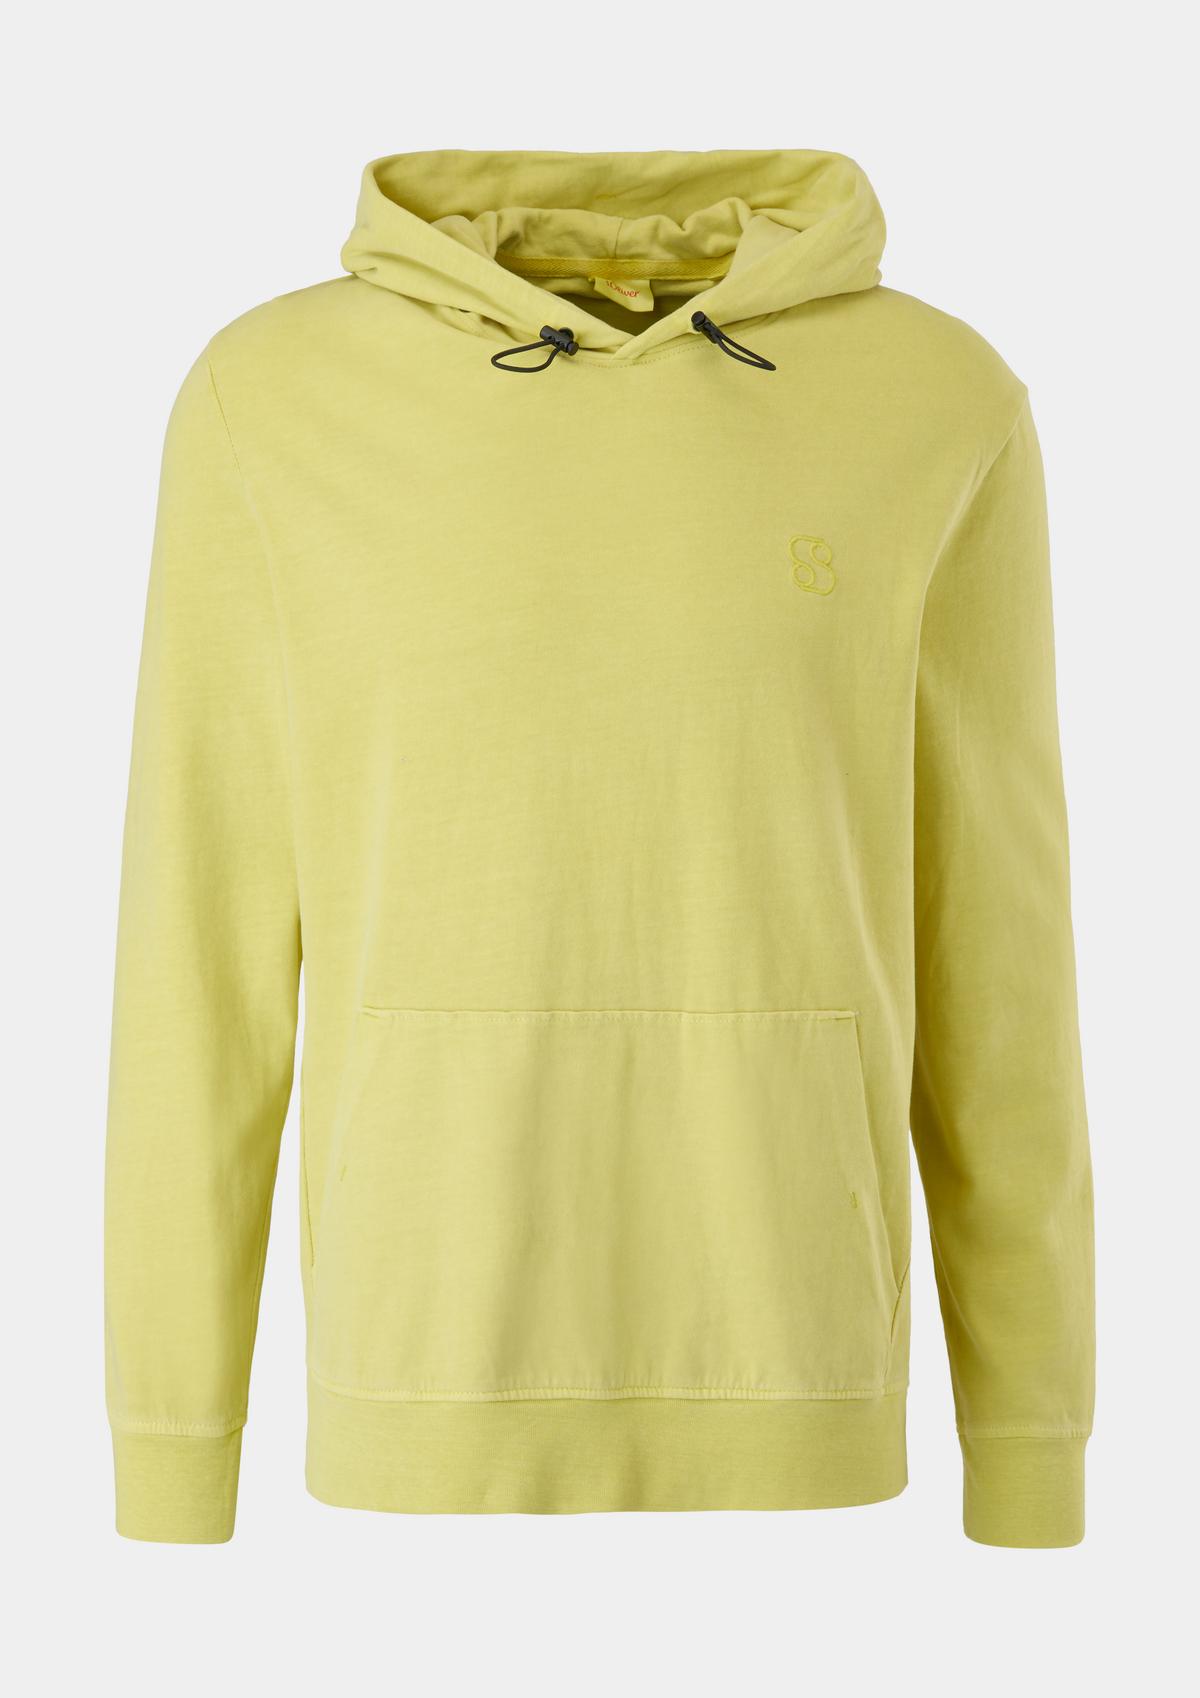 s.Oliver Long sleeve top with a hood